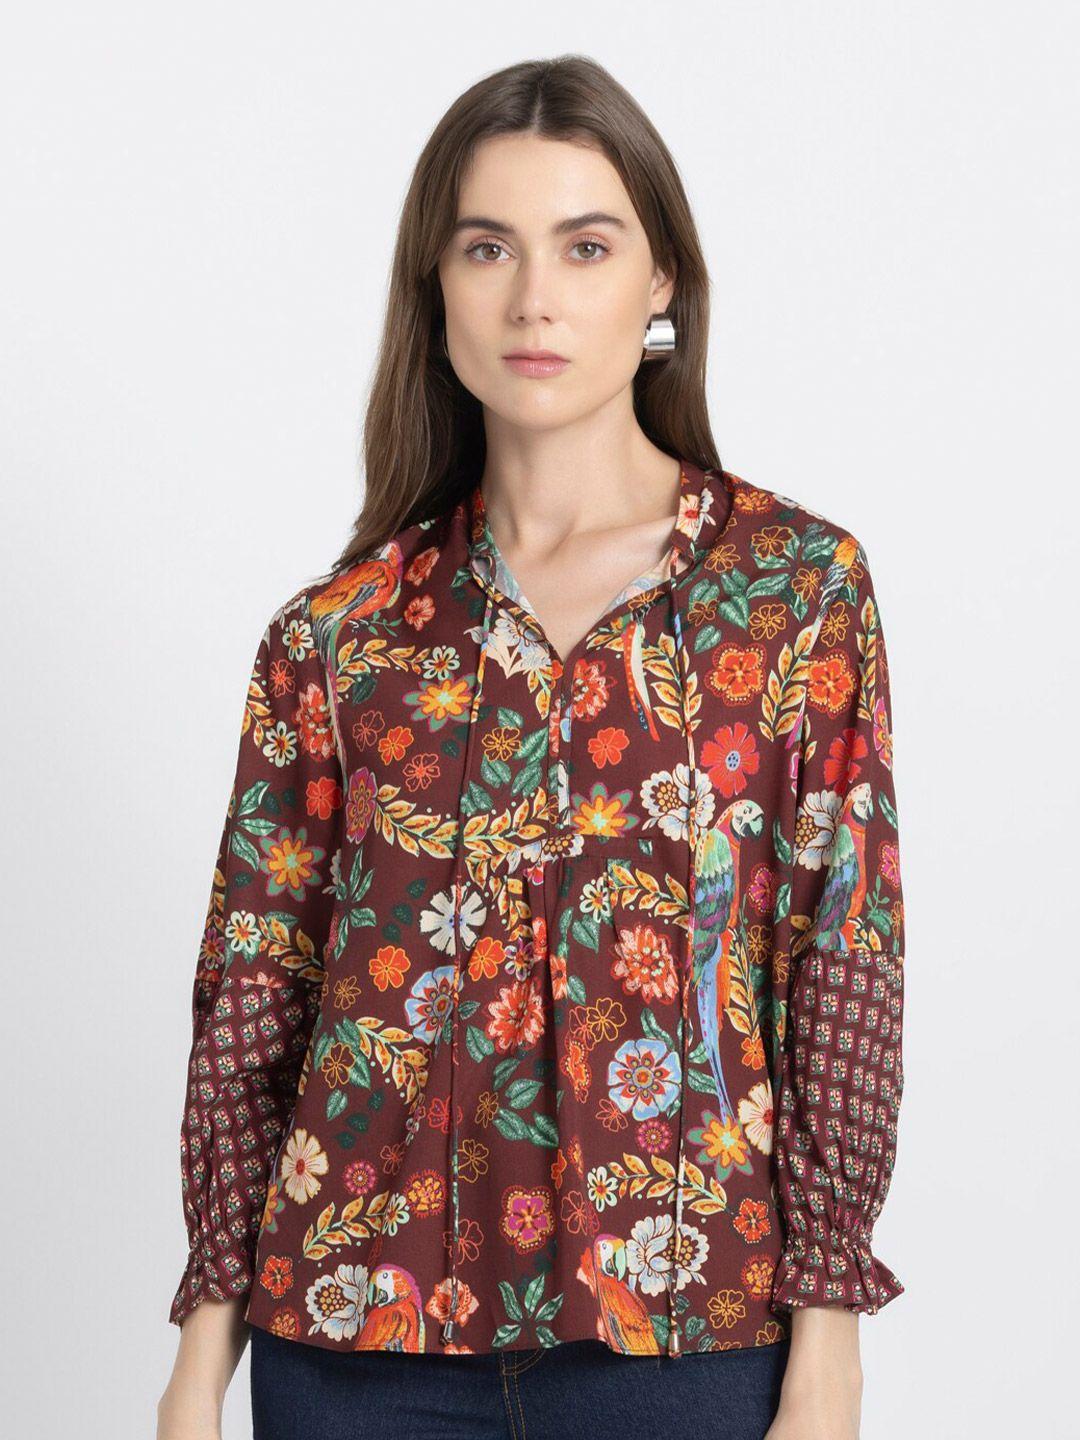 shaye floral printed tie-up neck shirt style top